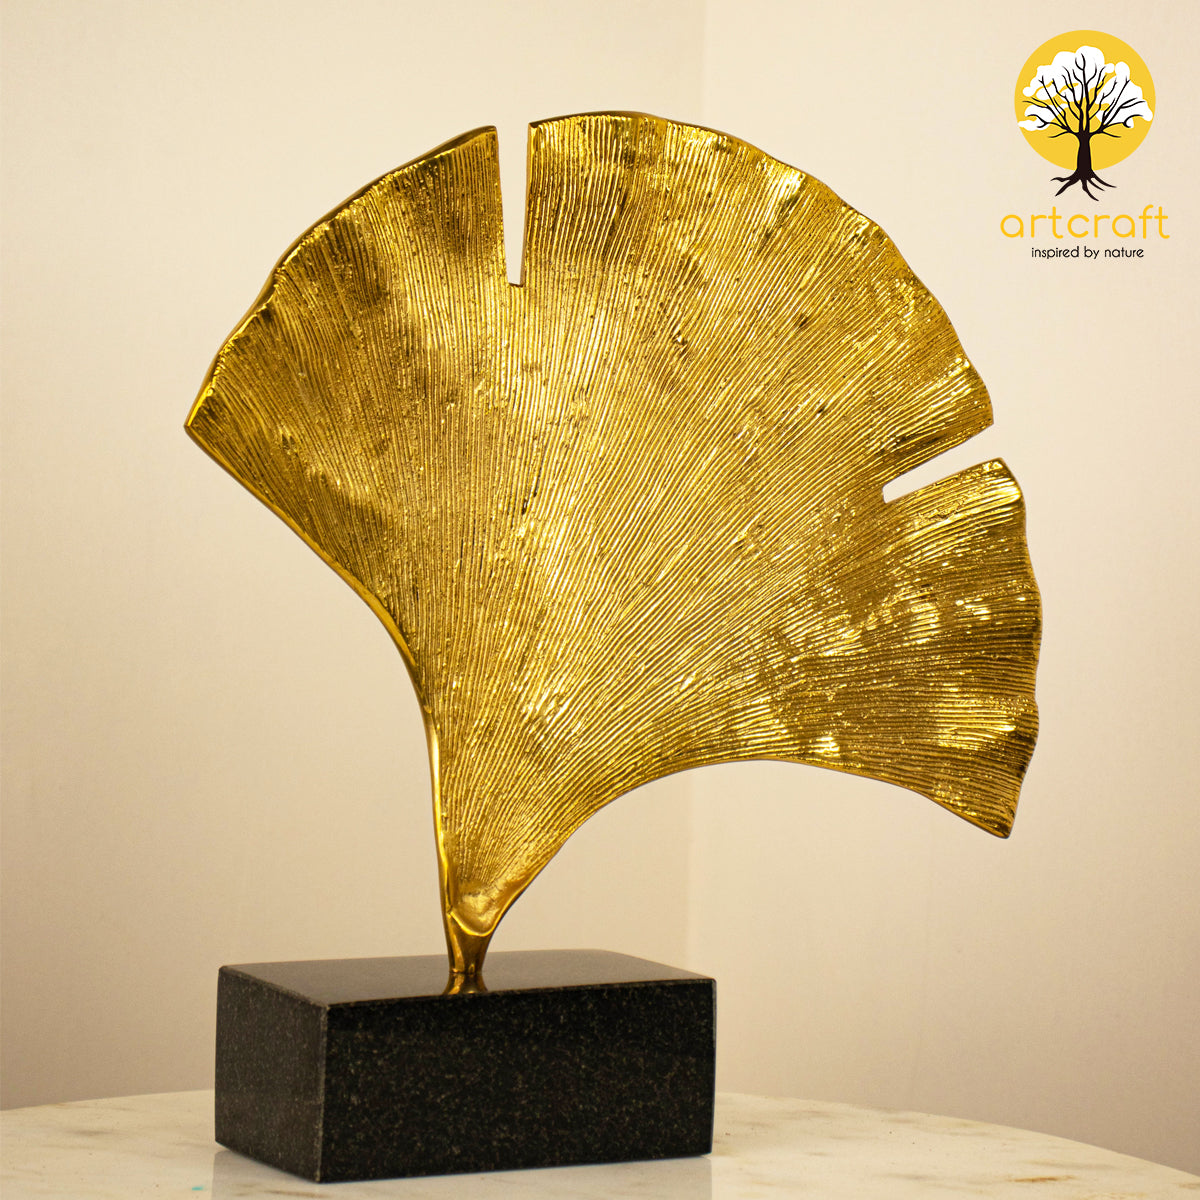 Gingko Leaf Table Art - 100% MADE FROM BRASS